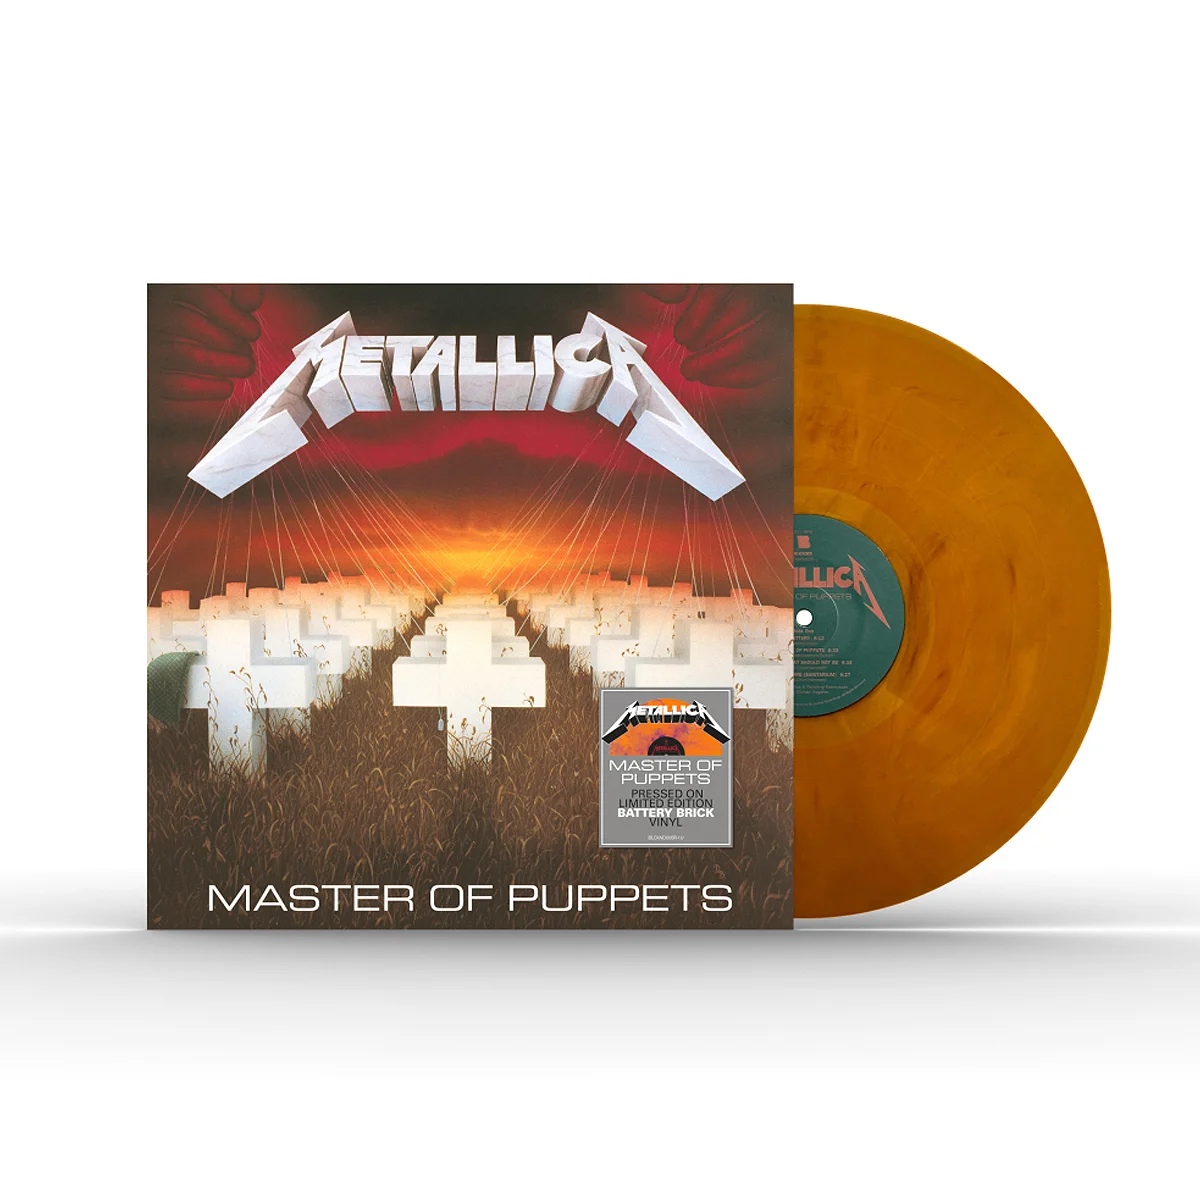 Metallica - Master of Puppets (Limited Edition Battery Brick Vinyl) (Master of Puppets (Limited Edition Battery Brick Vinyl))